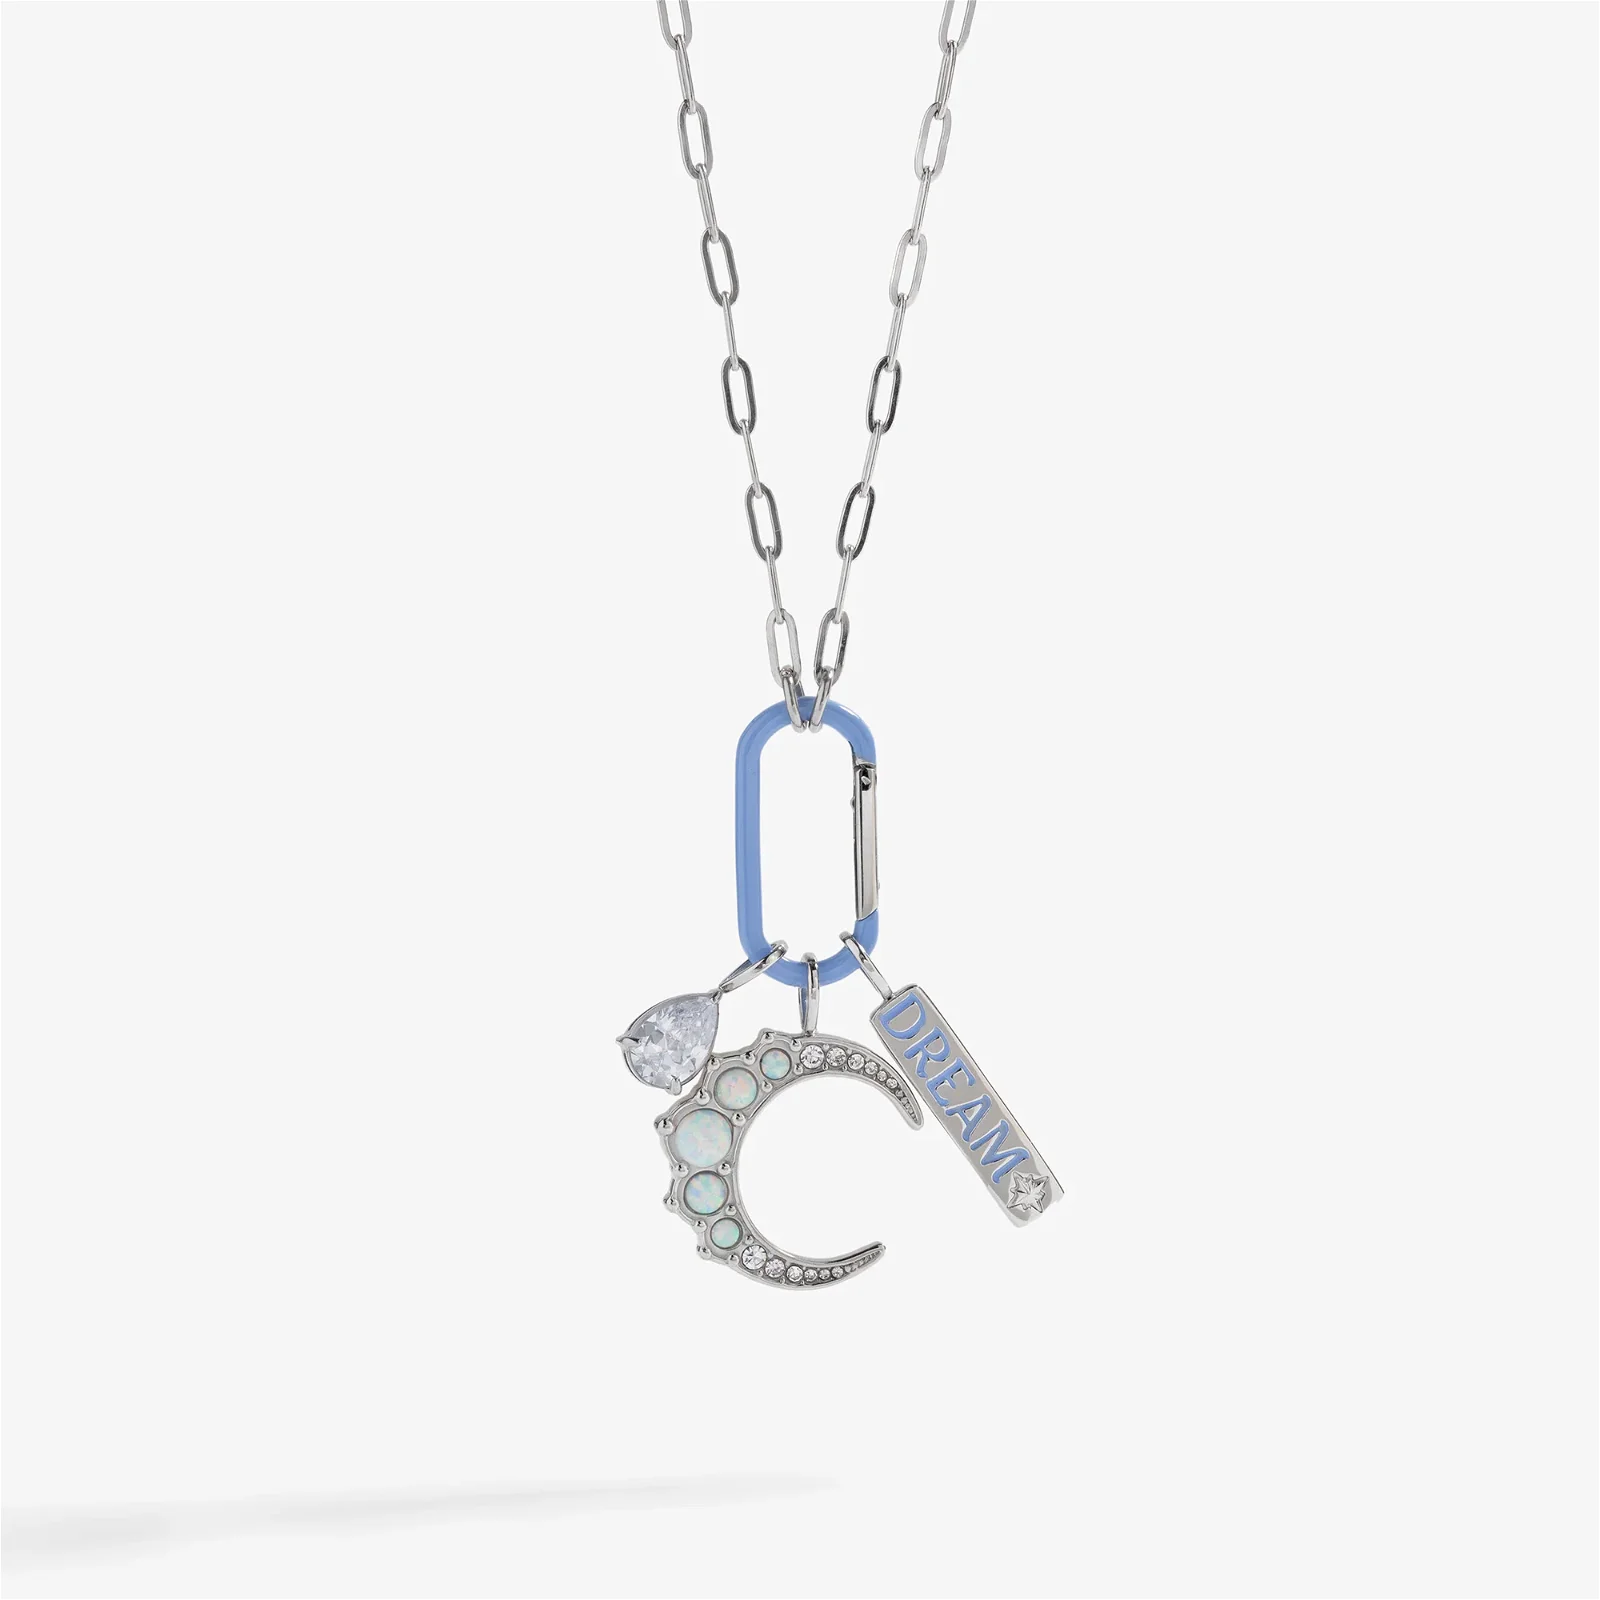 Image of Moon Dream Interchangeable Charm Necklace